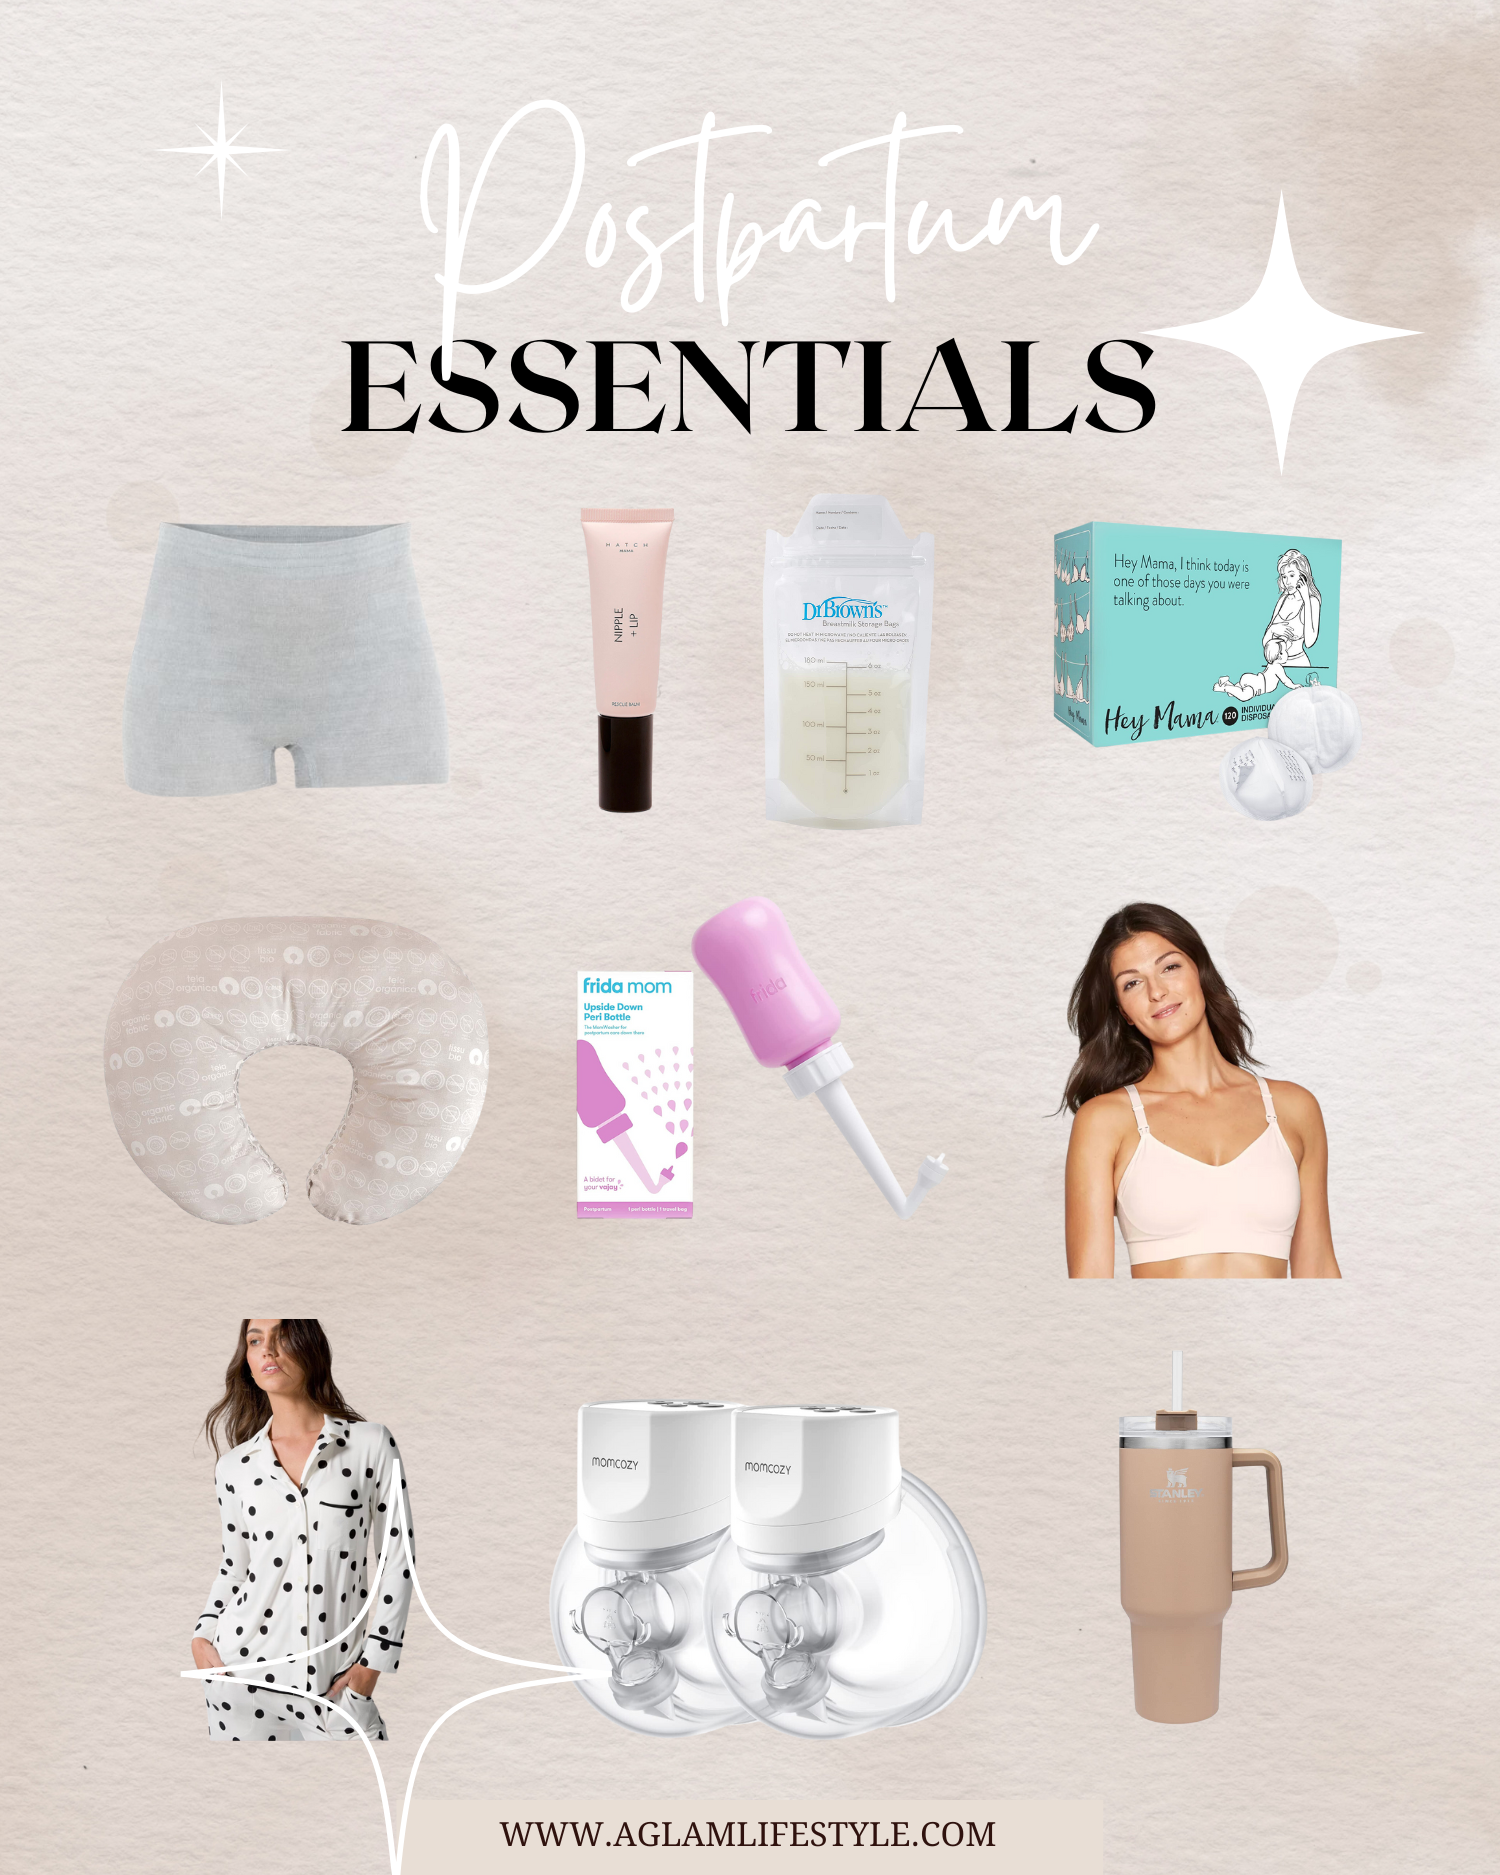 3rd Trimester Survival Kit: My 15 Must Haves —